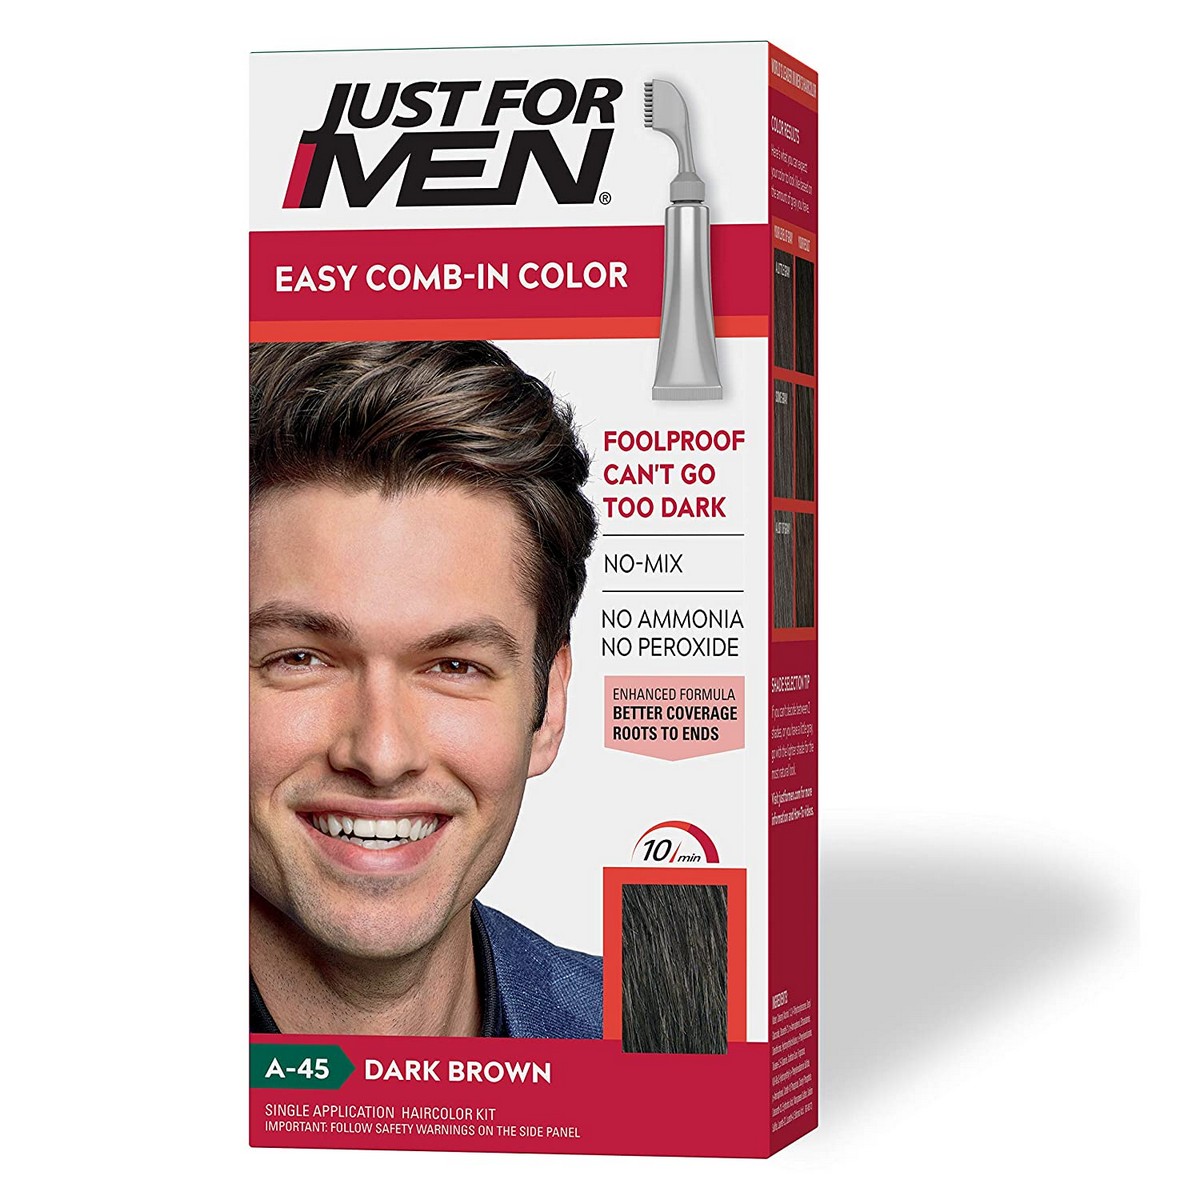 Men Easy Comb-in Color (formerly Autostop), Gray Hair Coloring For Men With Comb Applicator - Dark Brown, A-45